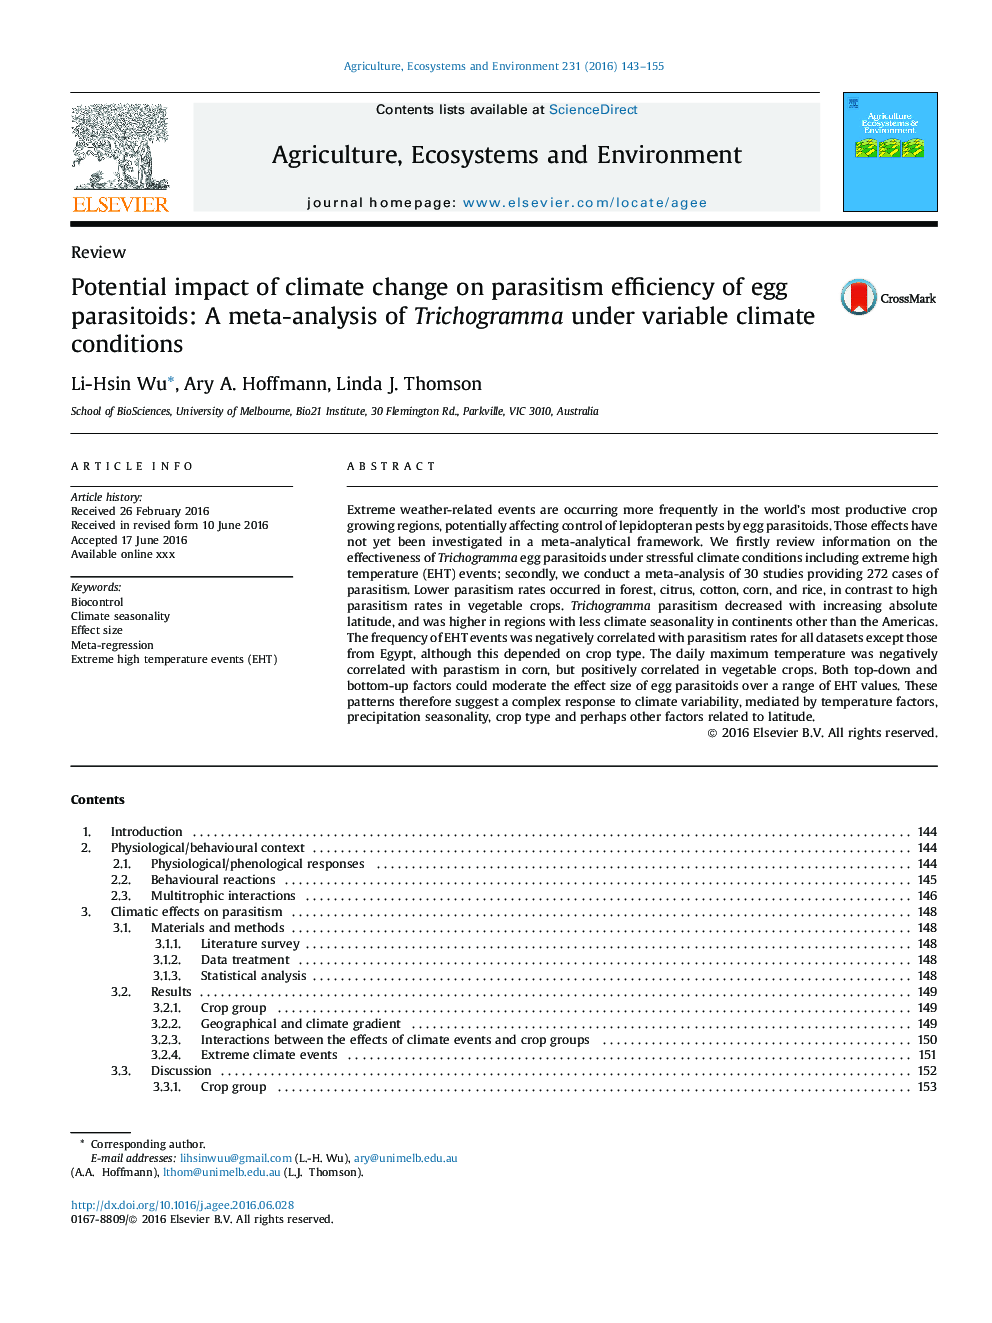 Potential impact of climate change on parasitism efficiency of egg parasitoids: A meta-analysis of Trichogramma under variable climate conditions